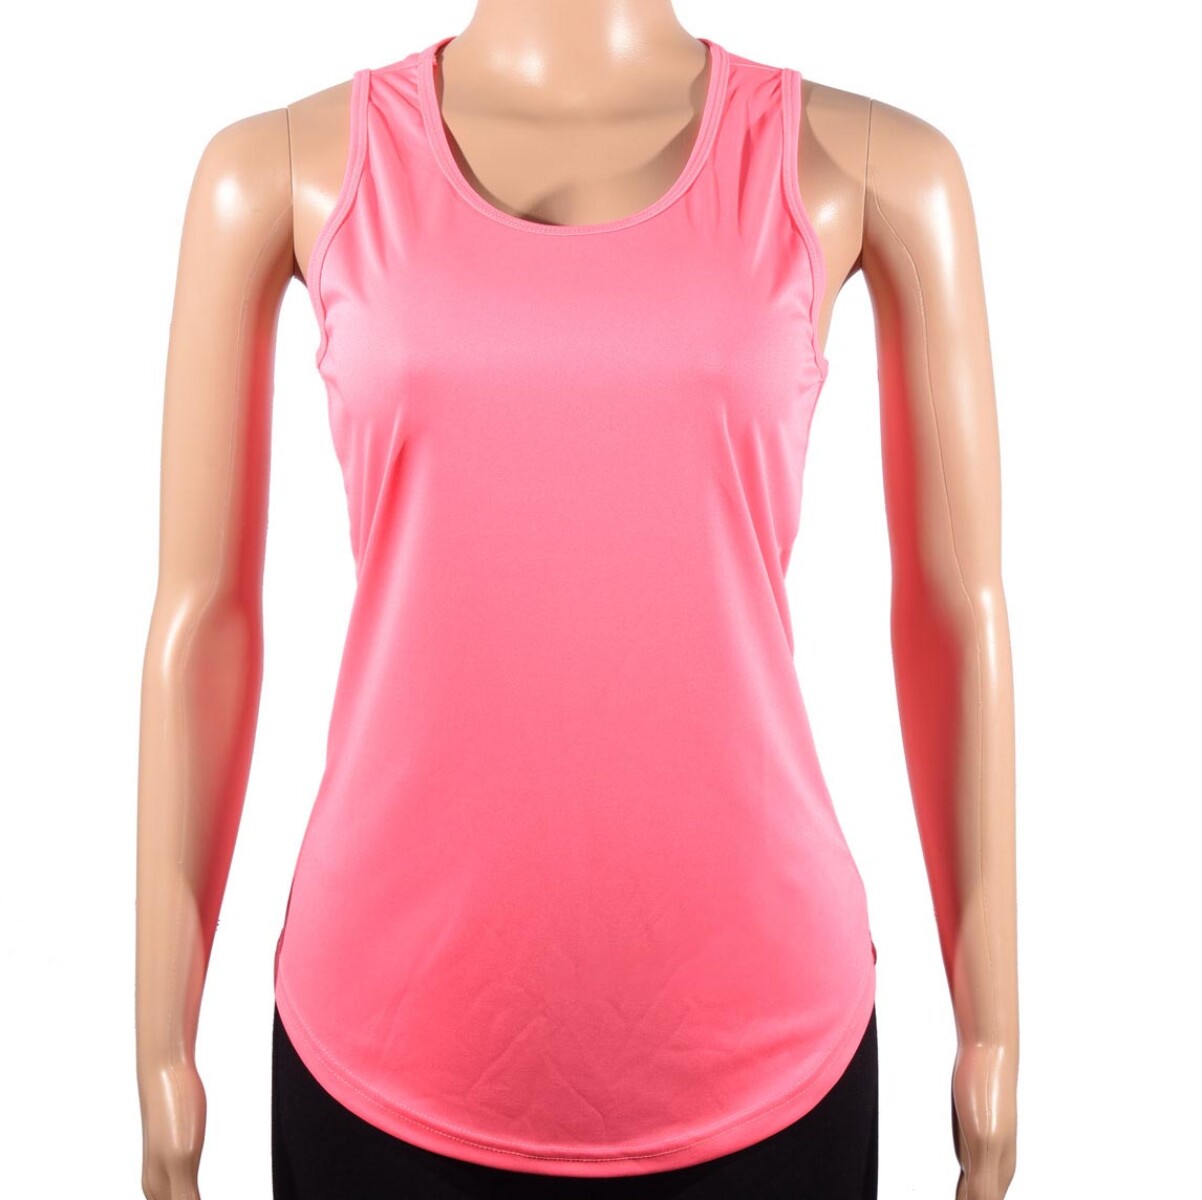 Musculosa dama Dry Fit - Rosa fluo 